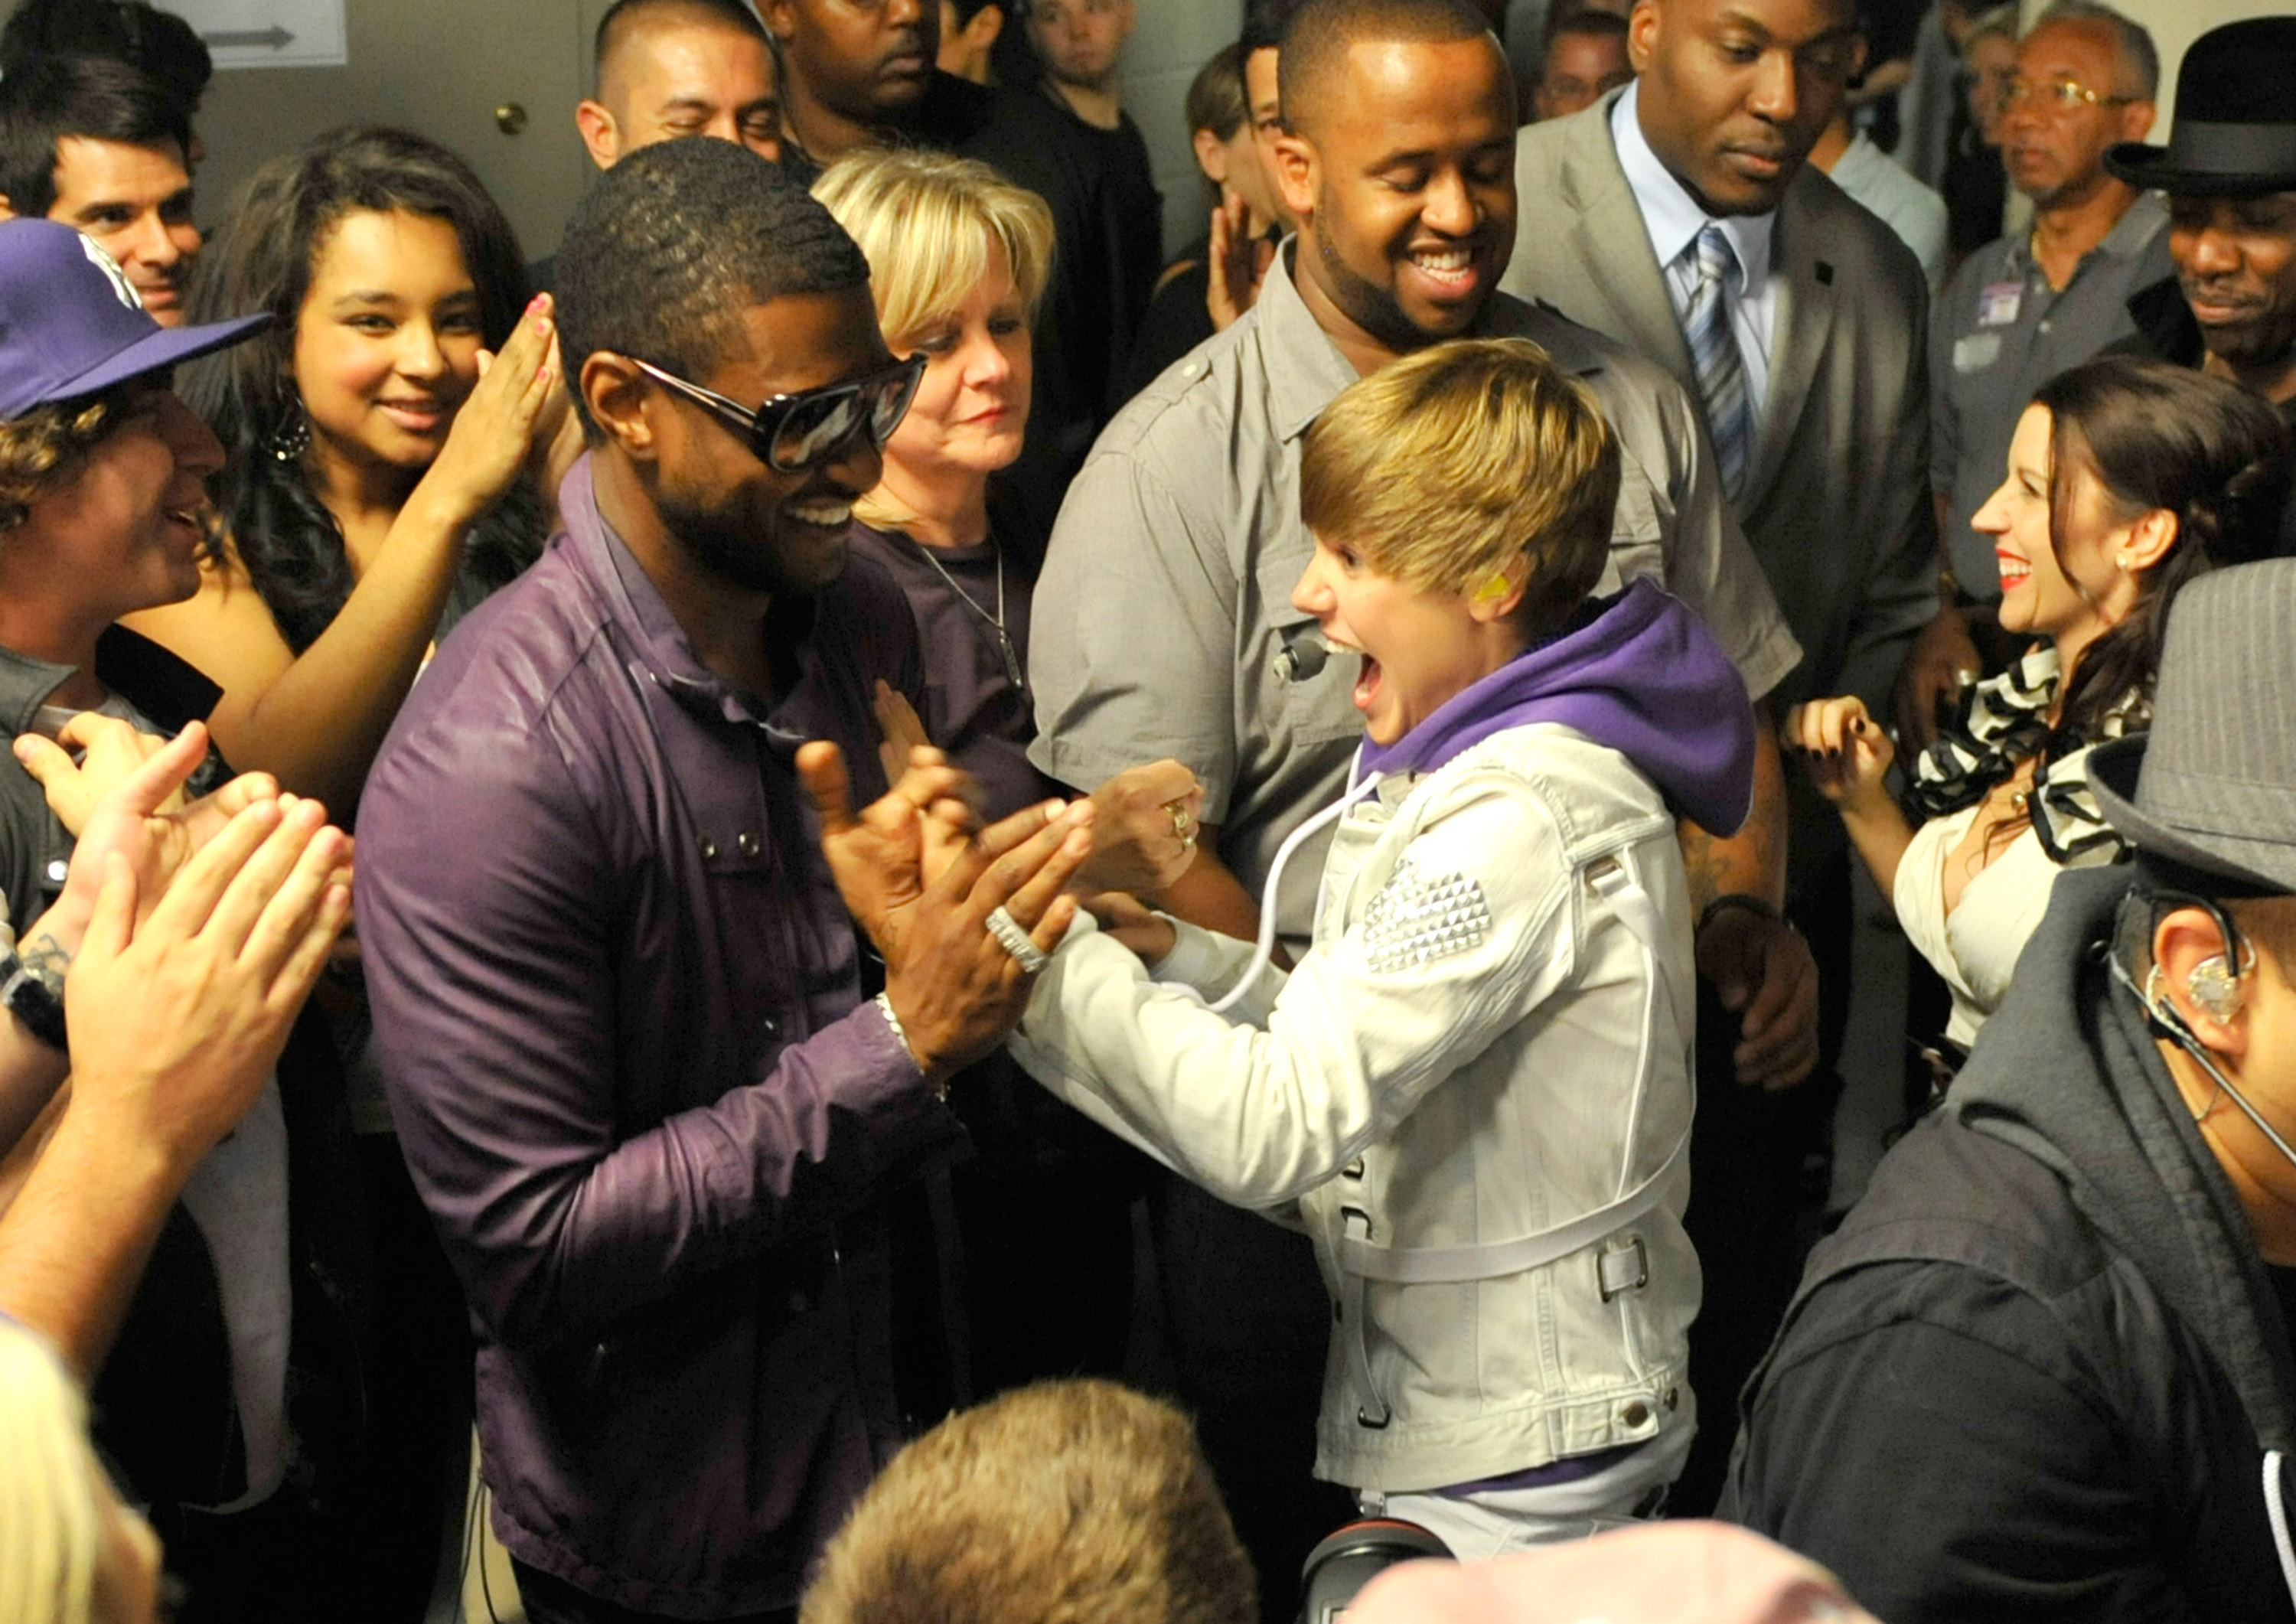 Usher and Justin Bieber shaking hands excitingly in the middle of a crowd backstage